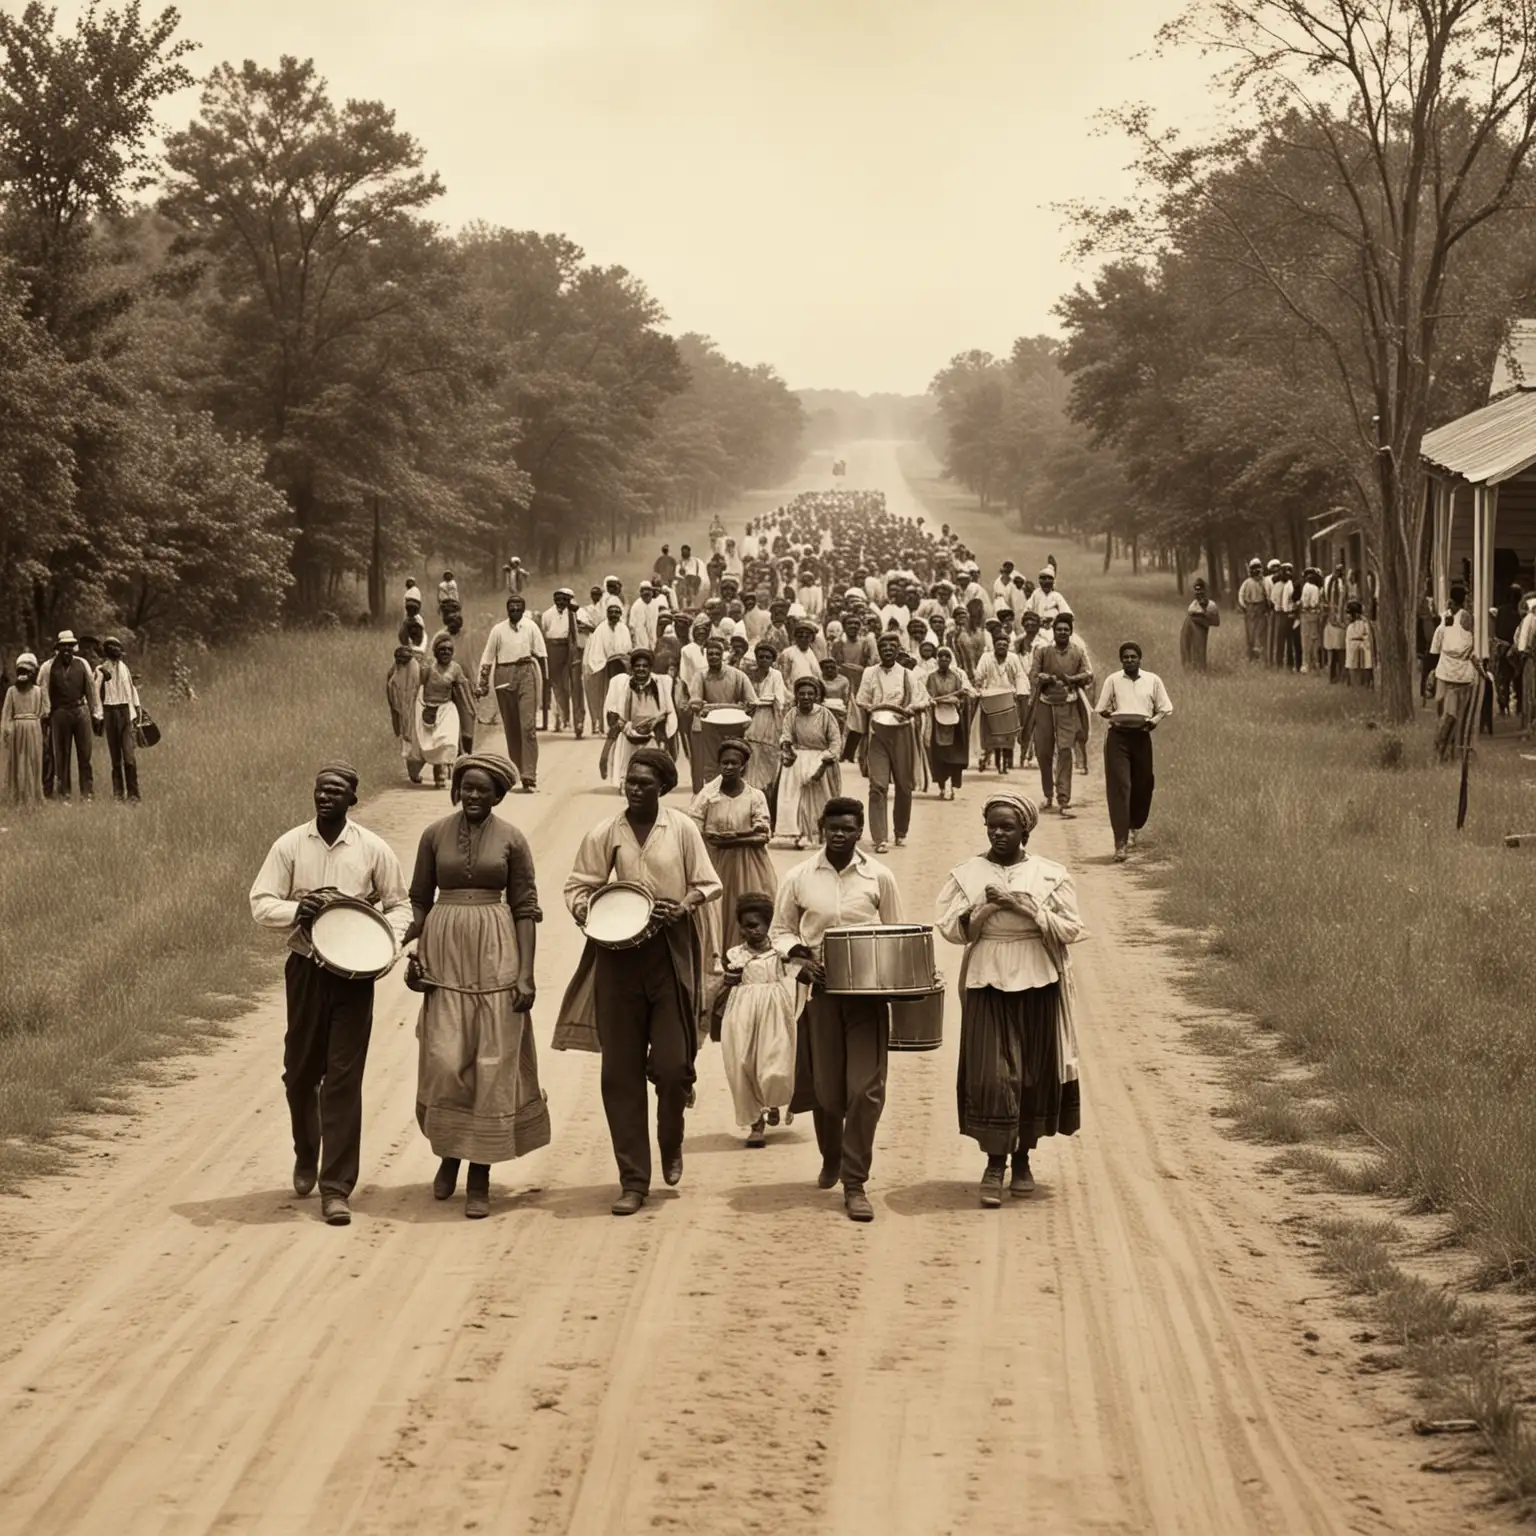 AfricanAmerican Families Marching to Drum Beats in Rural 1866 Scene